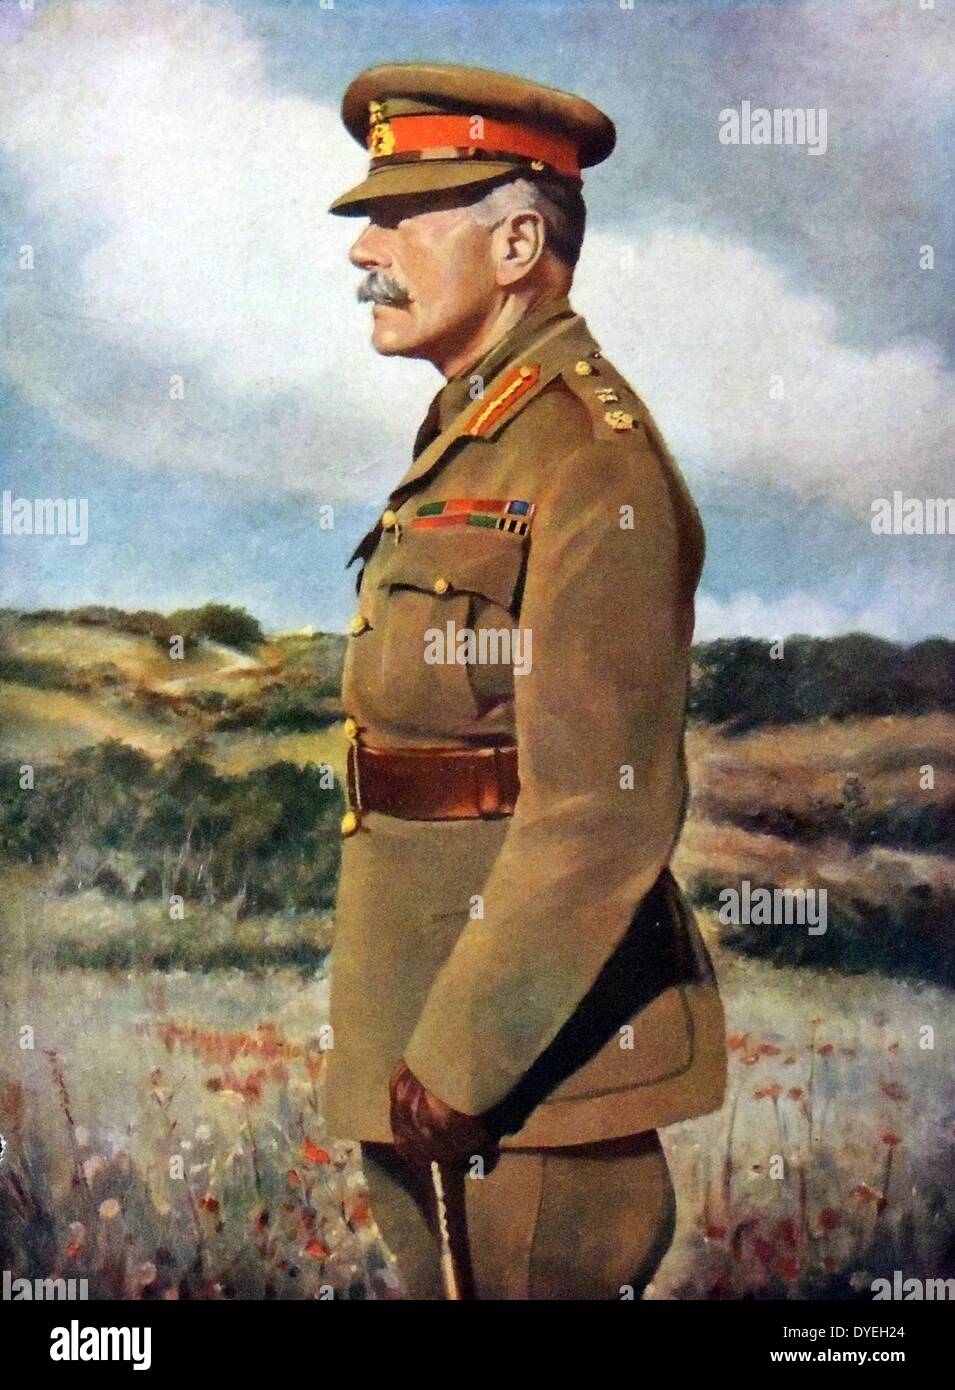 World War 1 - Field Marshal Sir Douglas Haig (1861-1928). Douglas Haig was born in Edinburgh on 19 June 1861 into a wealthy family. He studied at Oxford University and in 1884 went to the military Academy at Sandhurst. He had an extensive career and served as commander in chief of British Home Forces from 1918 until his retirement in 1921. He also helped establish the Royal British Legion and worked hard to raise funds for it. He was created an early in 1919 and died on 28 January 1928. Stock Photo